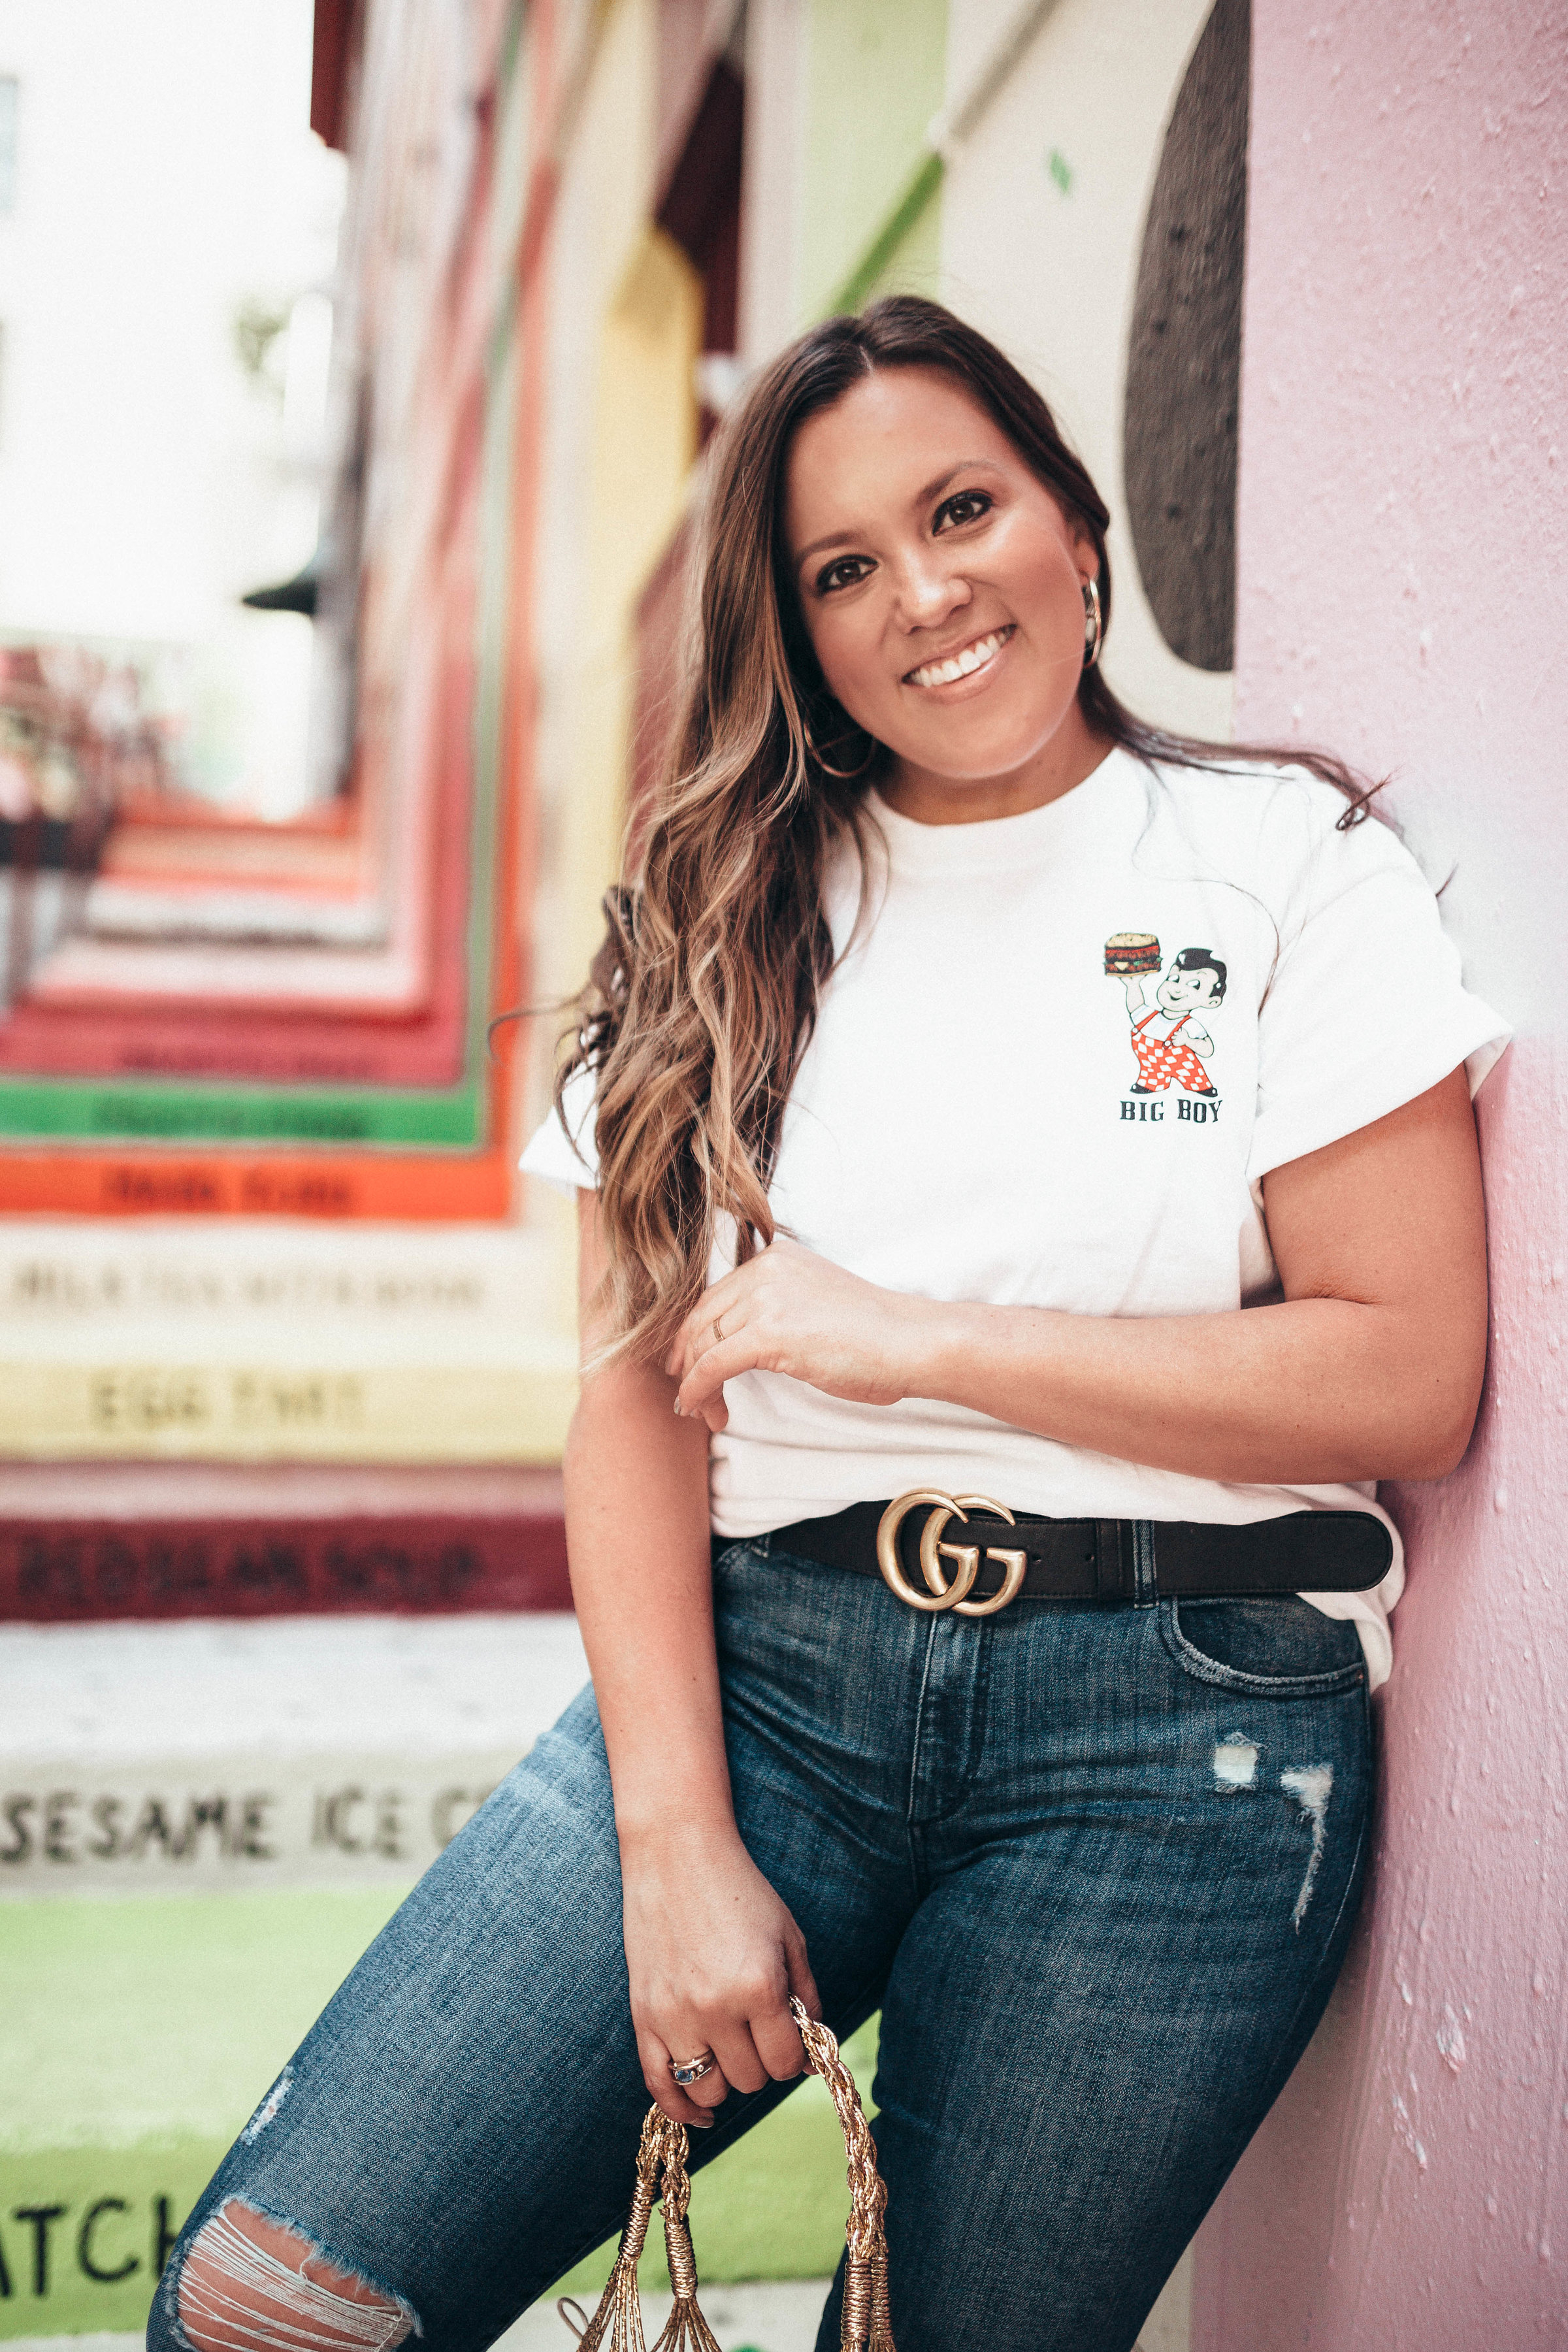 Ashley Zeal from Two Peas in a Prada shares the exact location of these colorful stairs in Chinatown. She is wearing a Bob's Big Boy graphic tee. 